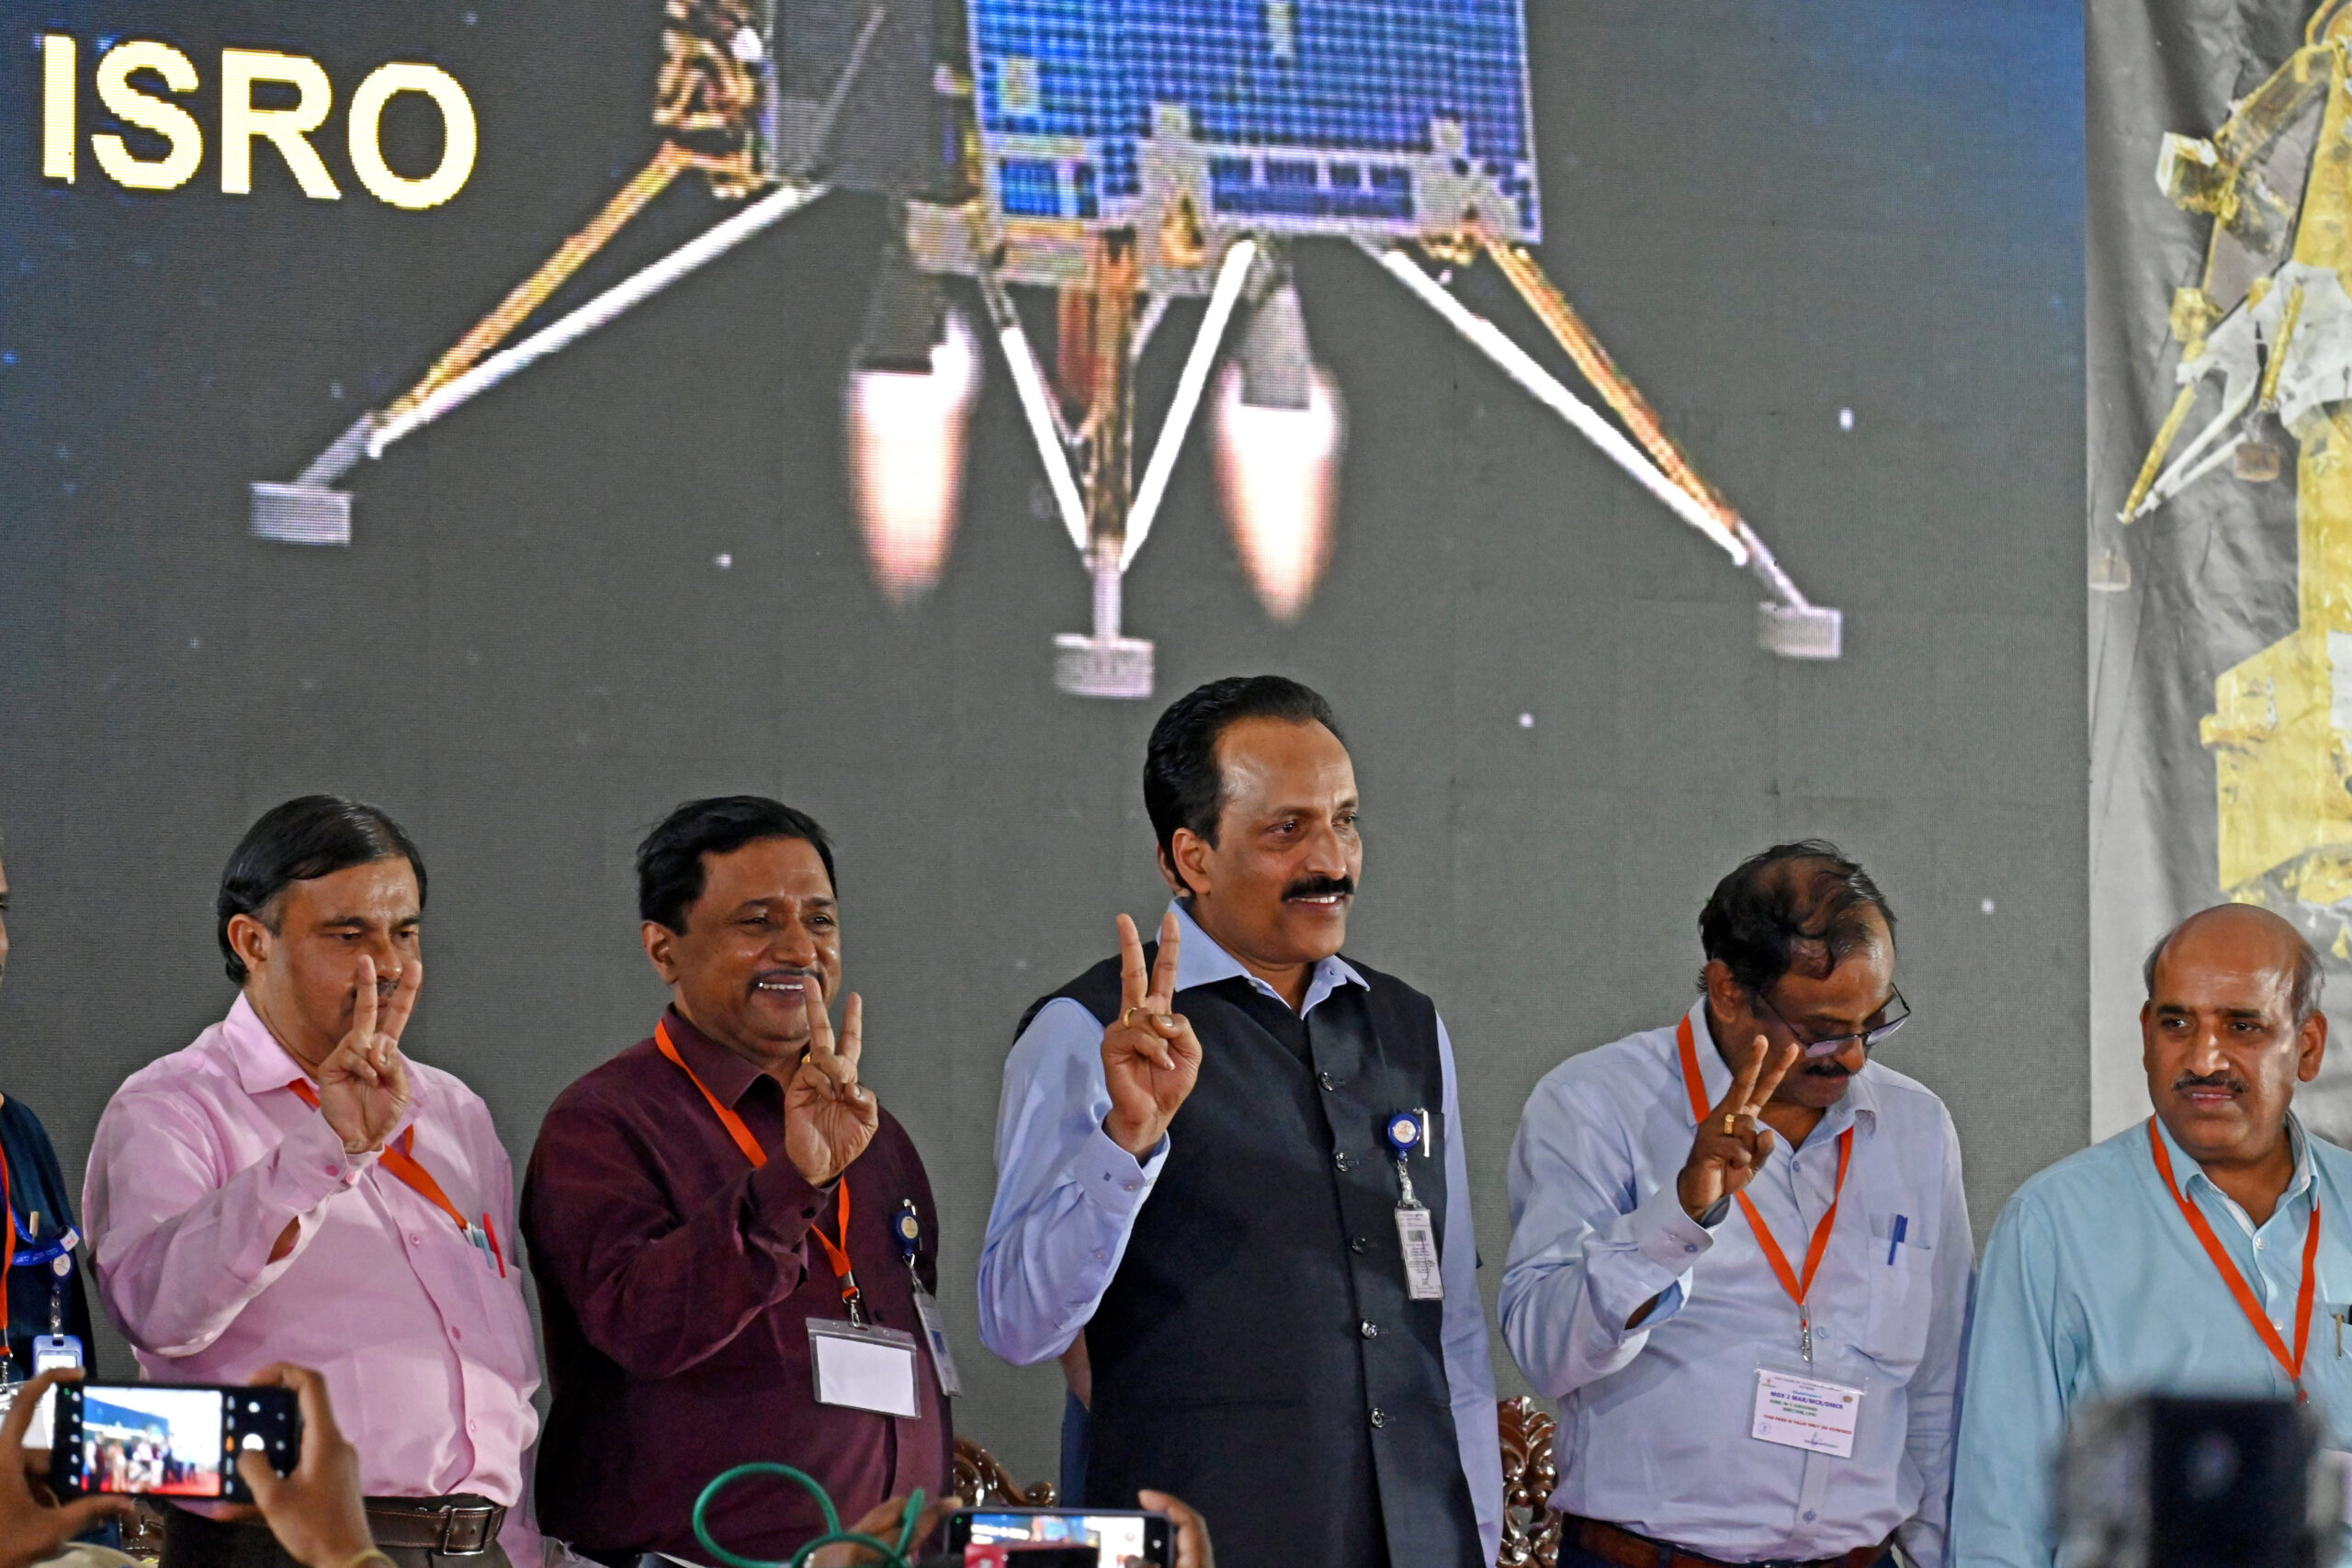 ISRO Chief S Somanath: On October 21,ISRO to conduct maiden Gaganyaan test vehicle mission